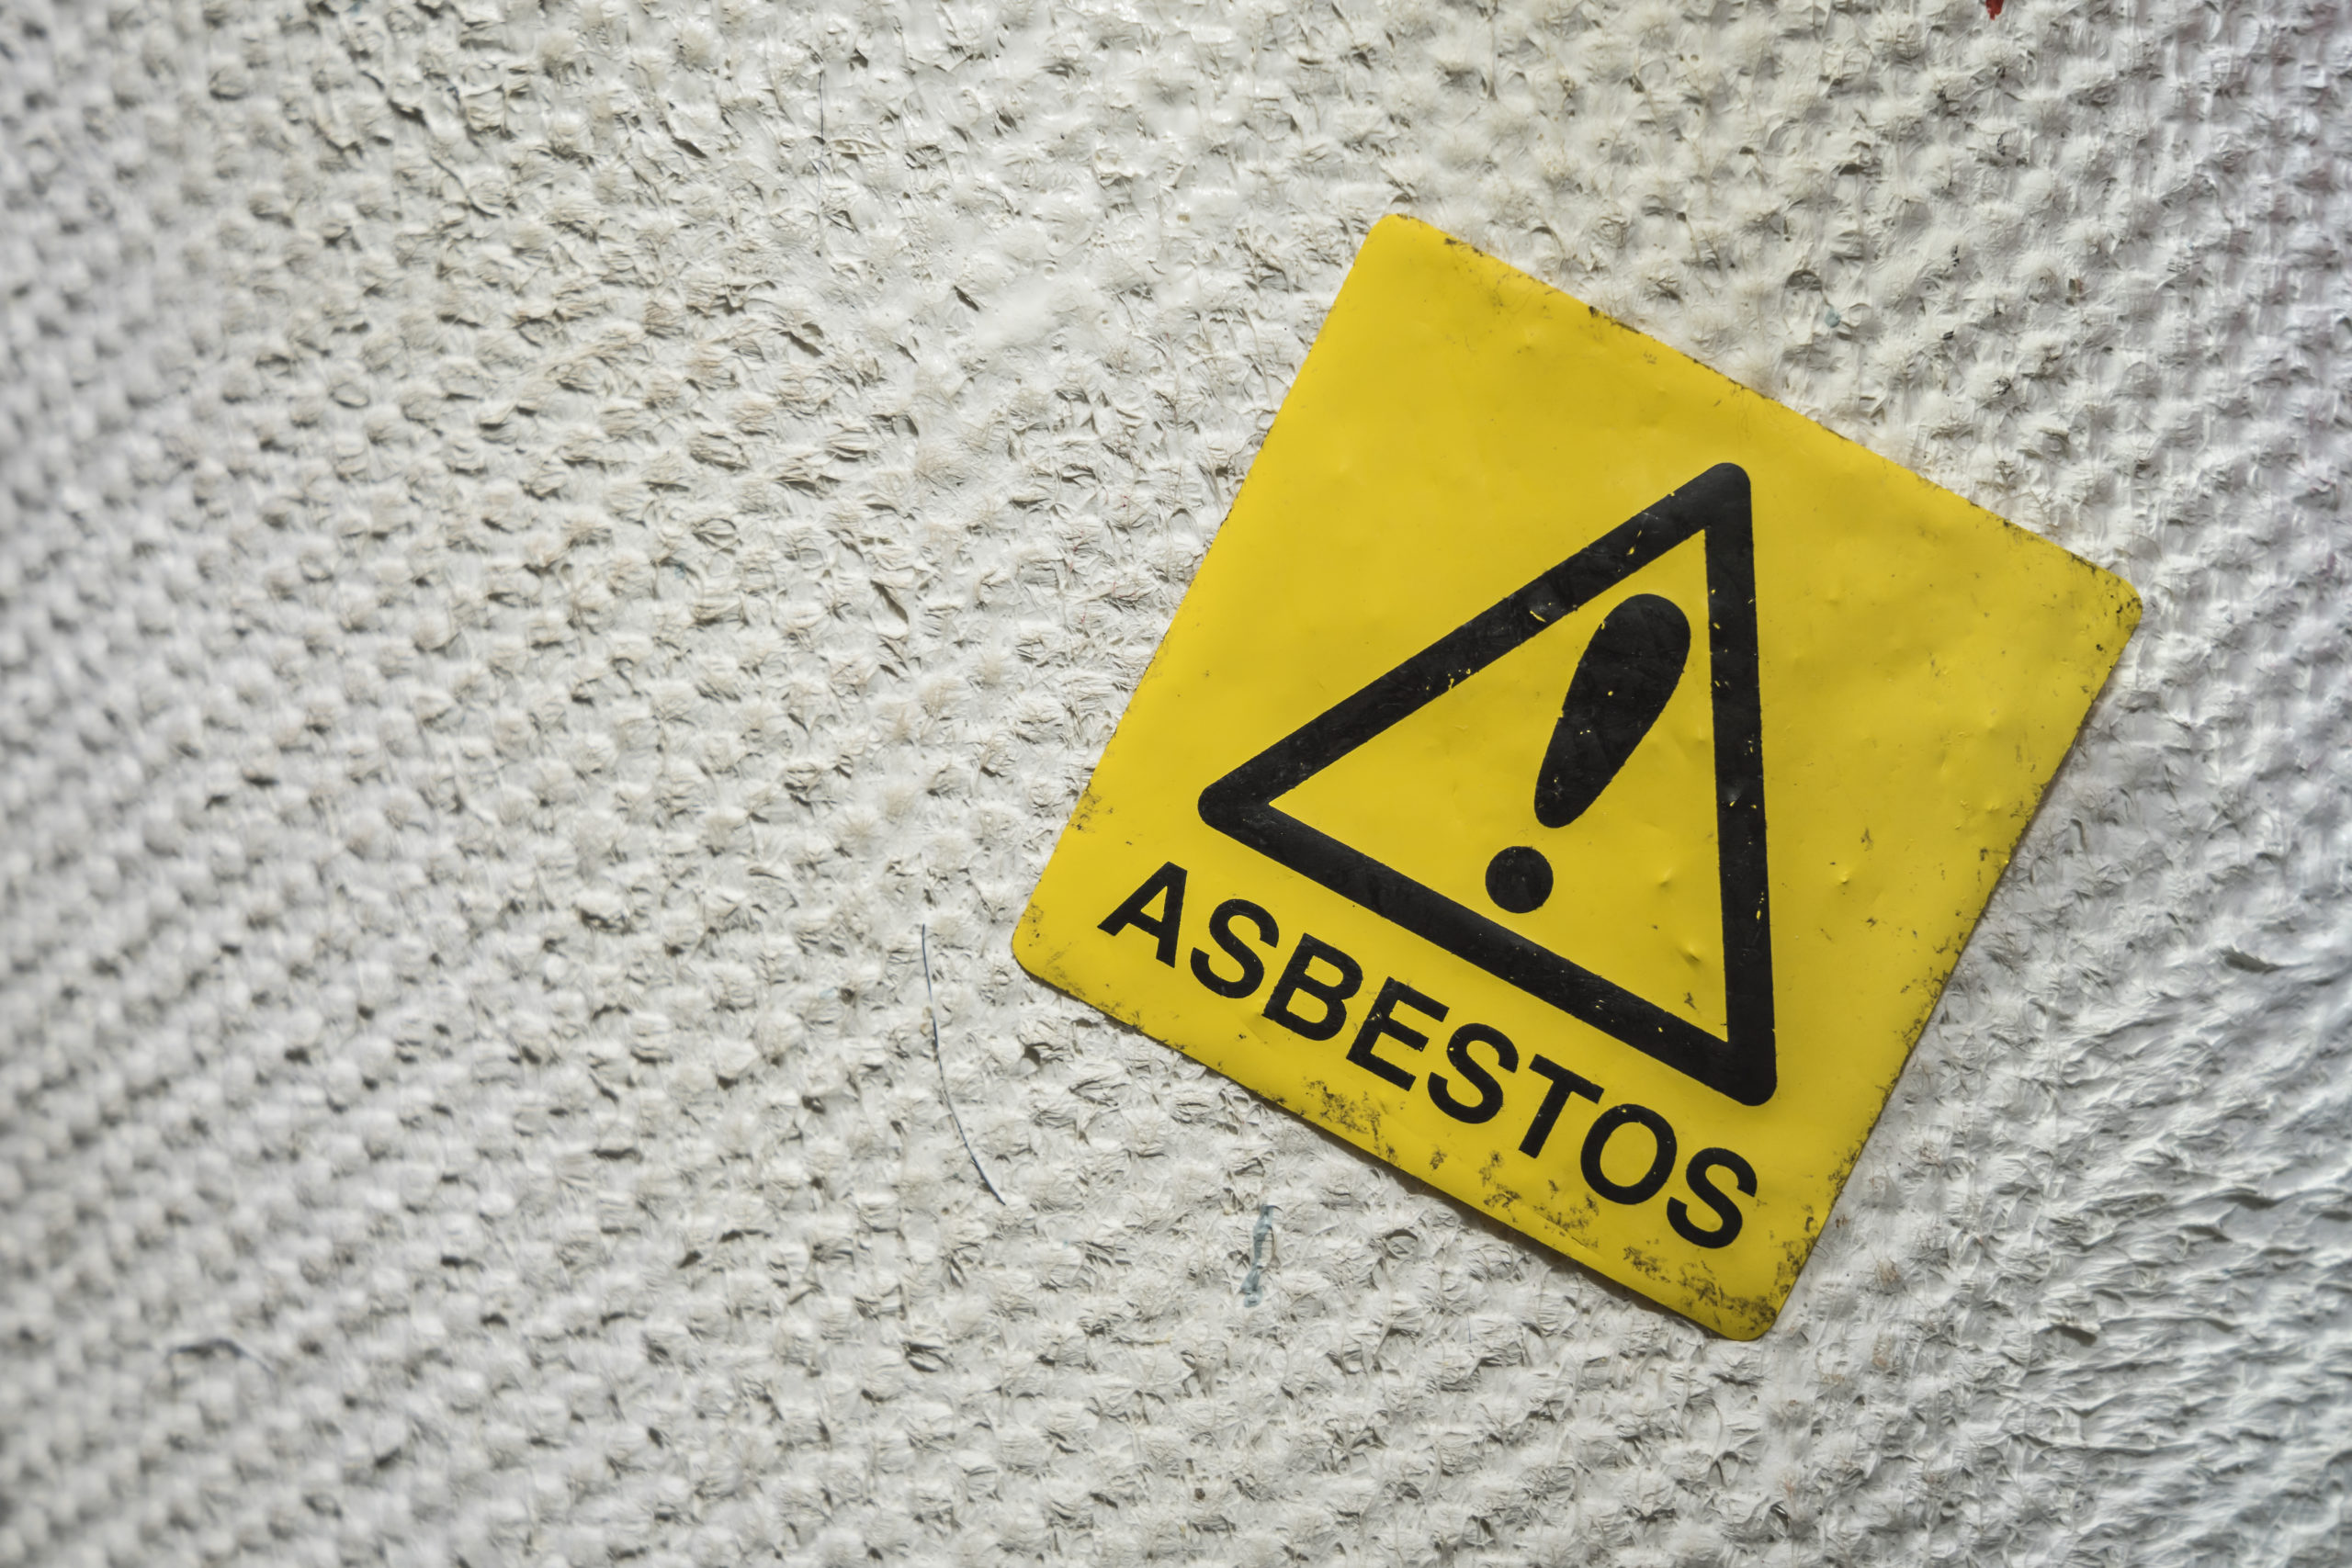 Large Amount of Asbestos Found in Building Planned for Restoration Project